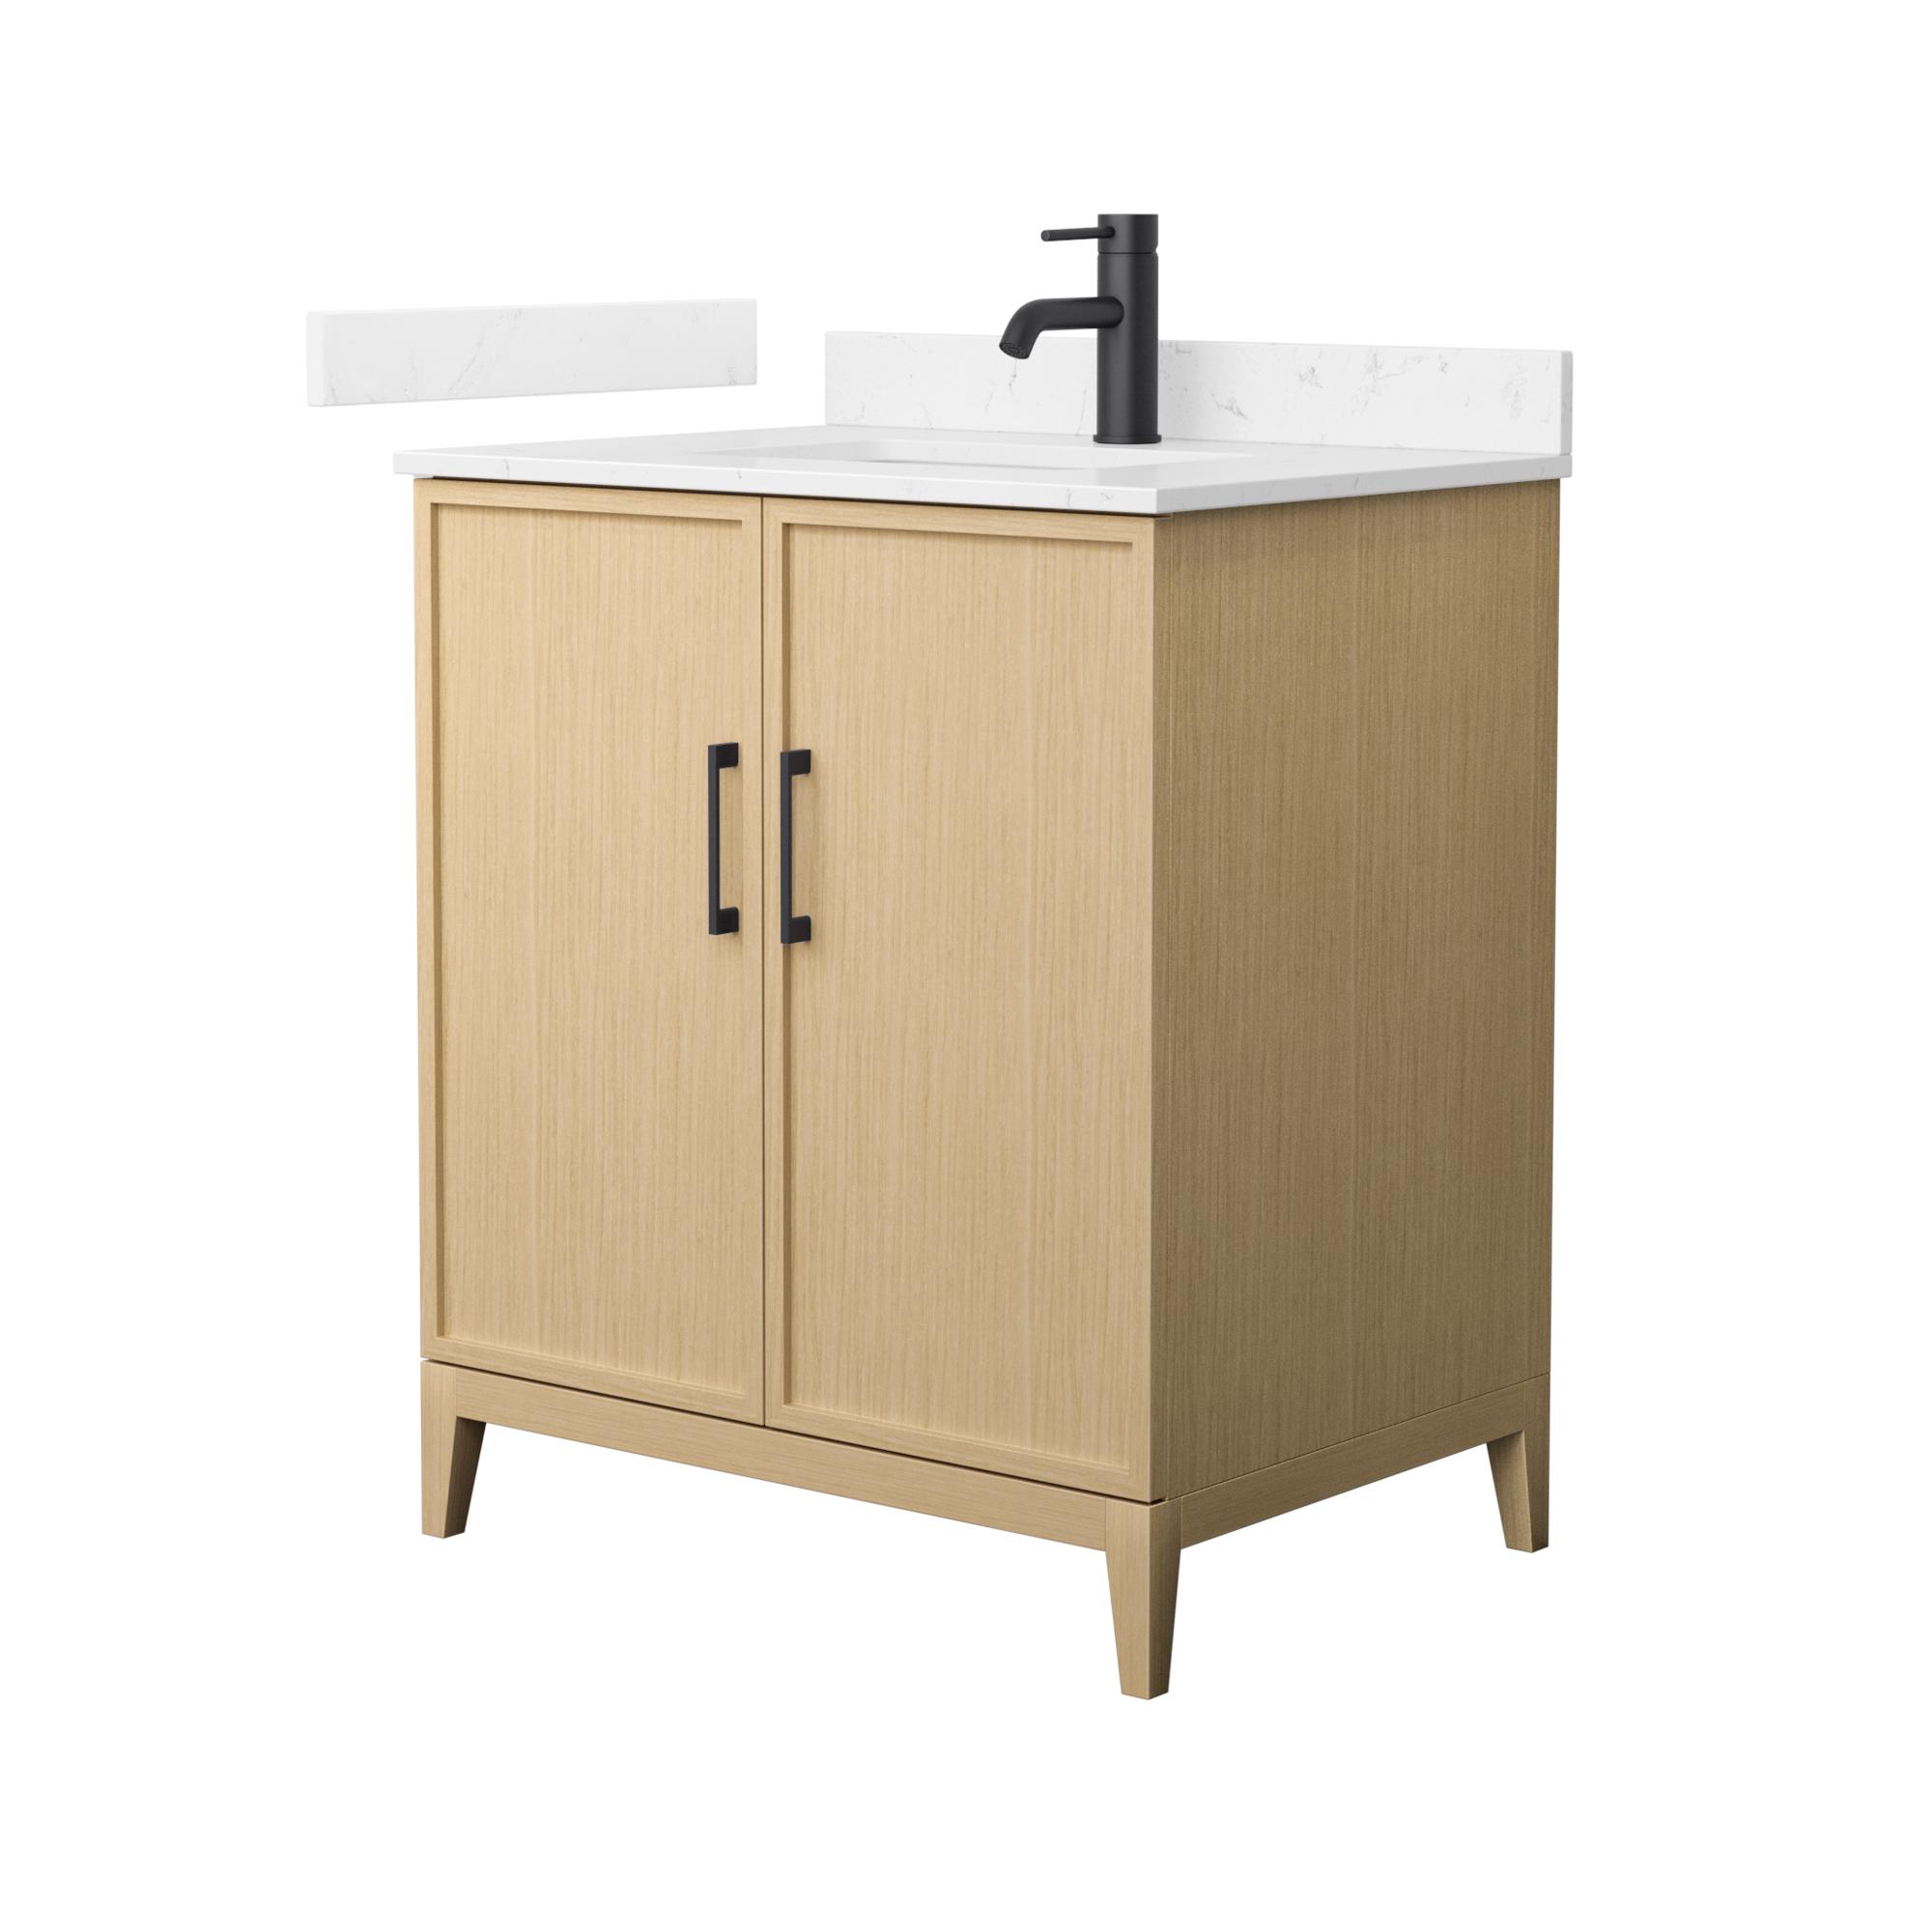 30" Transitional Single Vanity Base in White Oak, 7 Top Options with 2 Hardware Option